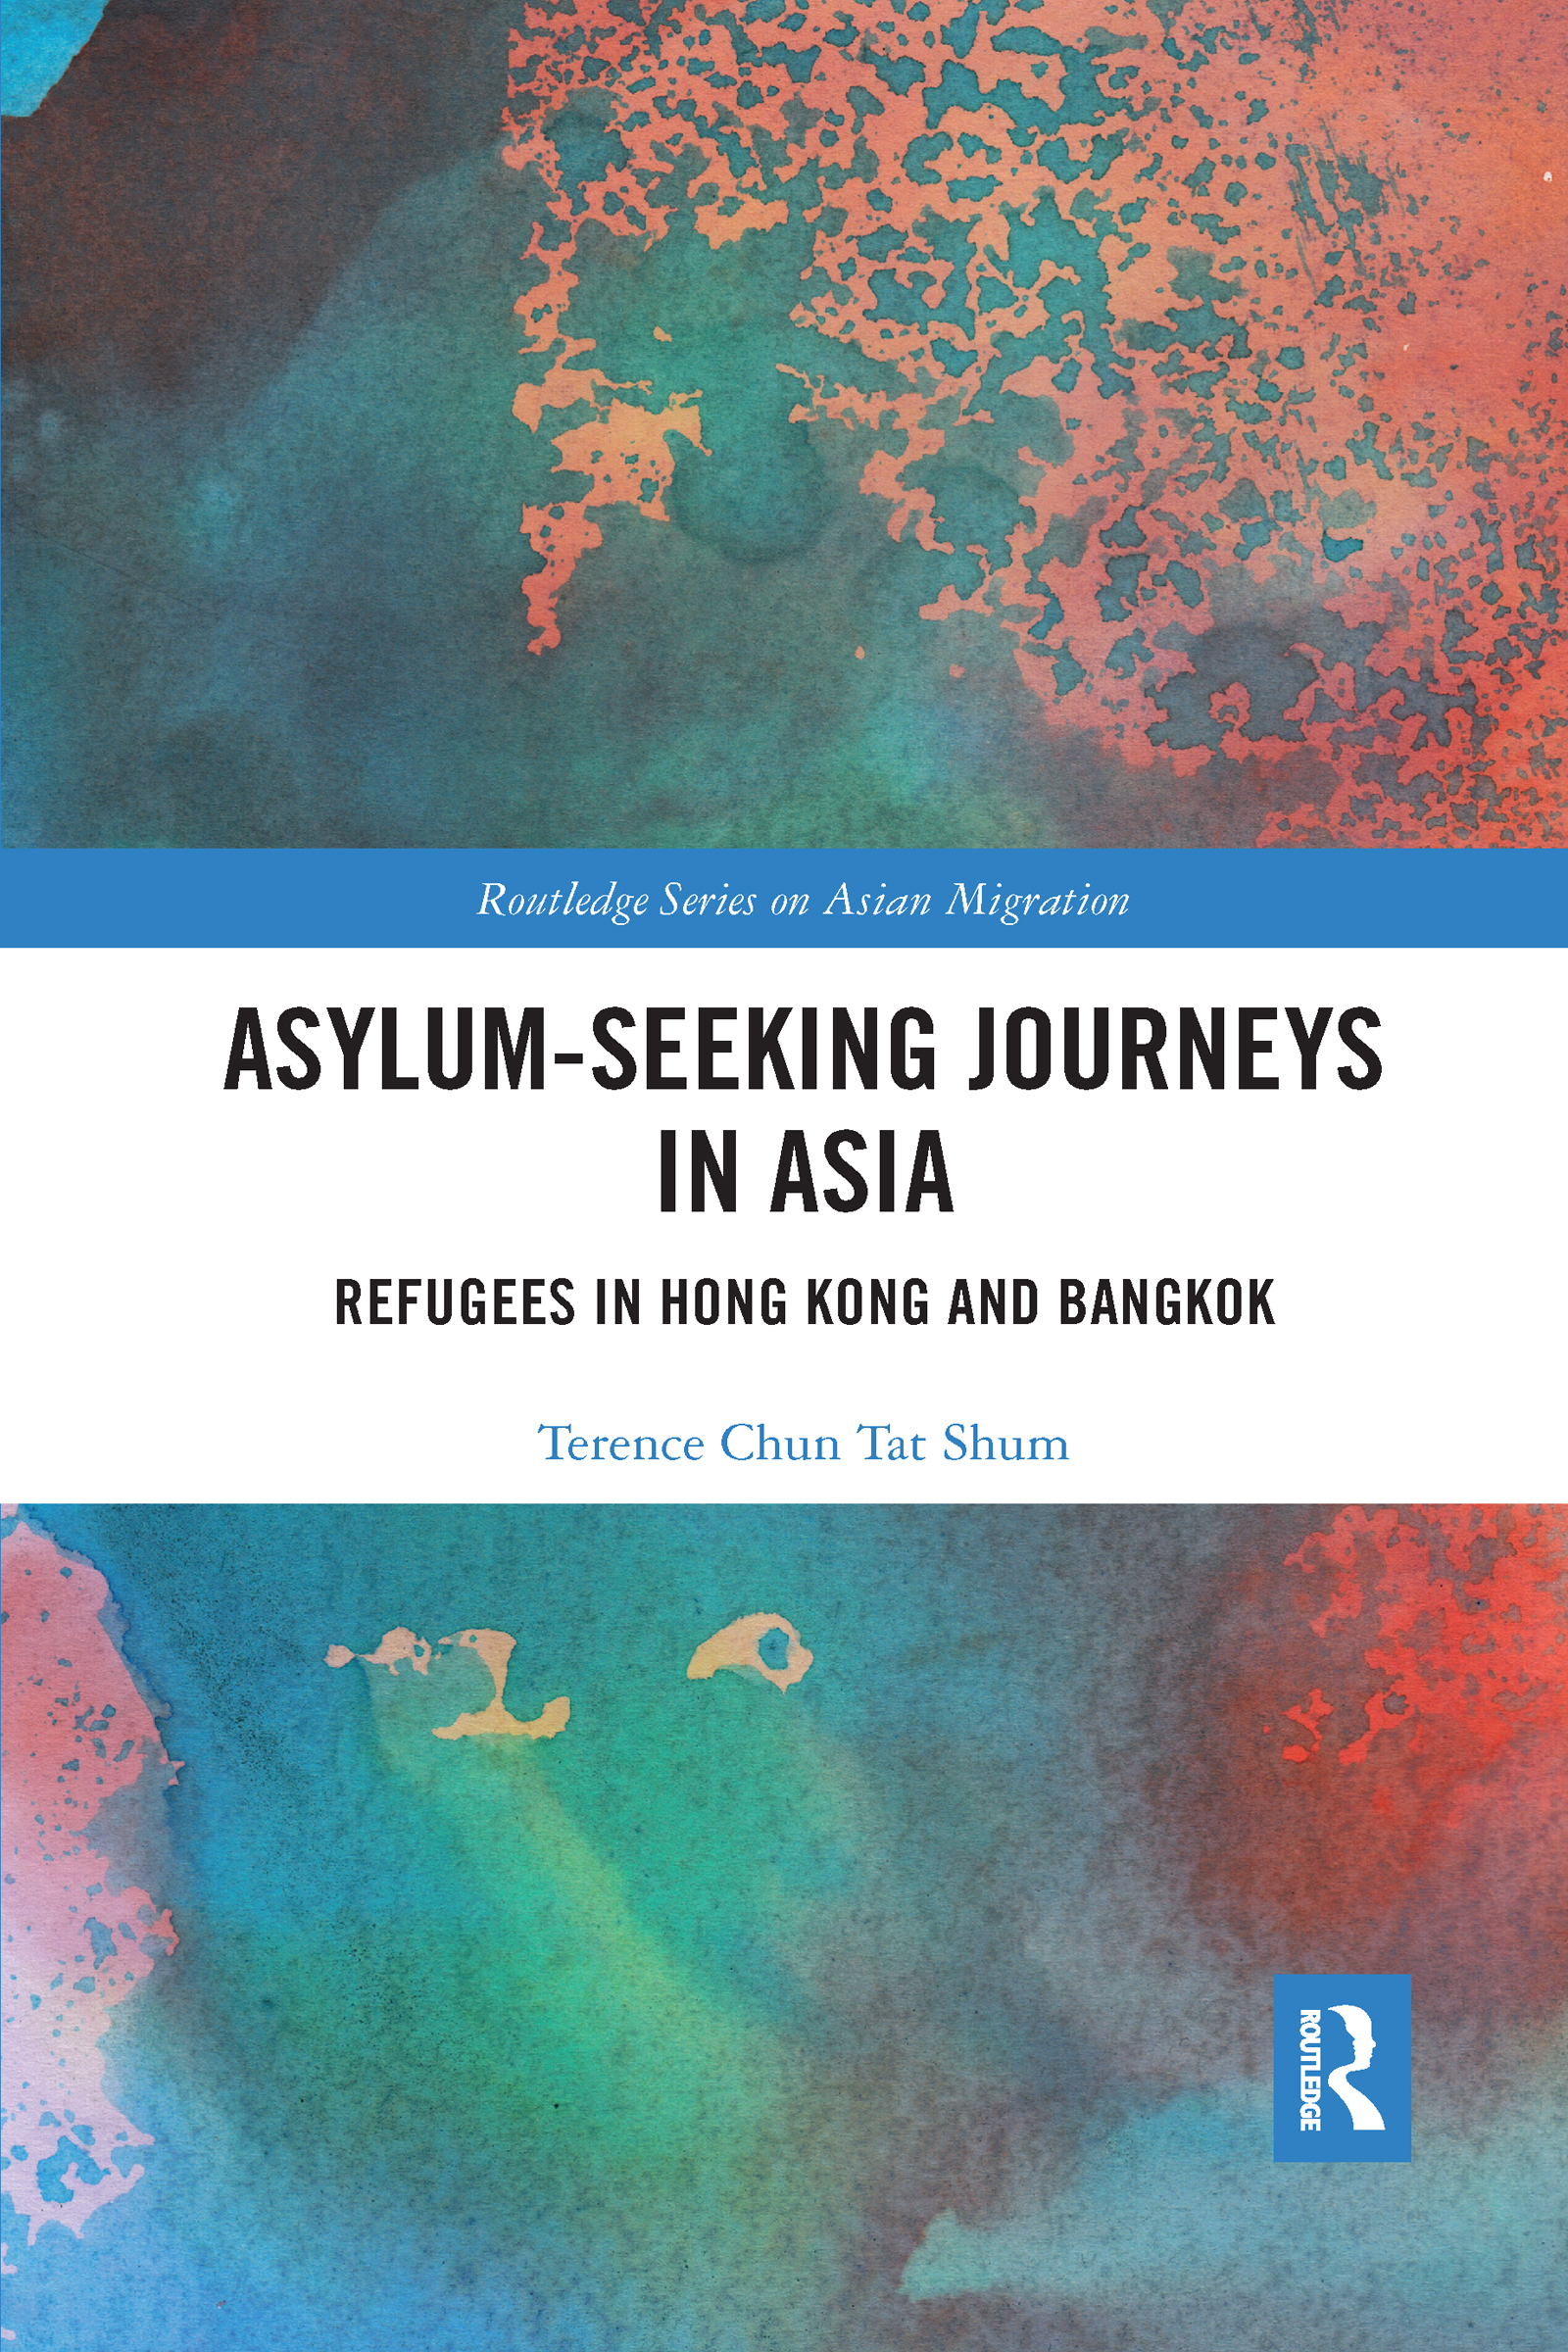 turquoise and orange illustration of water and land, book cover for Asylum-Seeking Journeys in Asia: Refugee in Hong Kong and Bangkok by Terence Chun Tat Shum